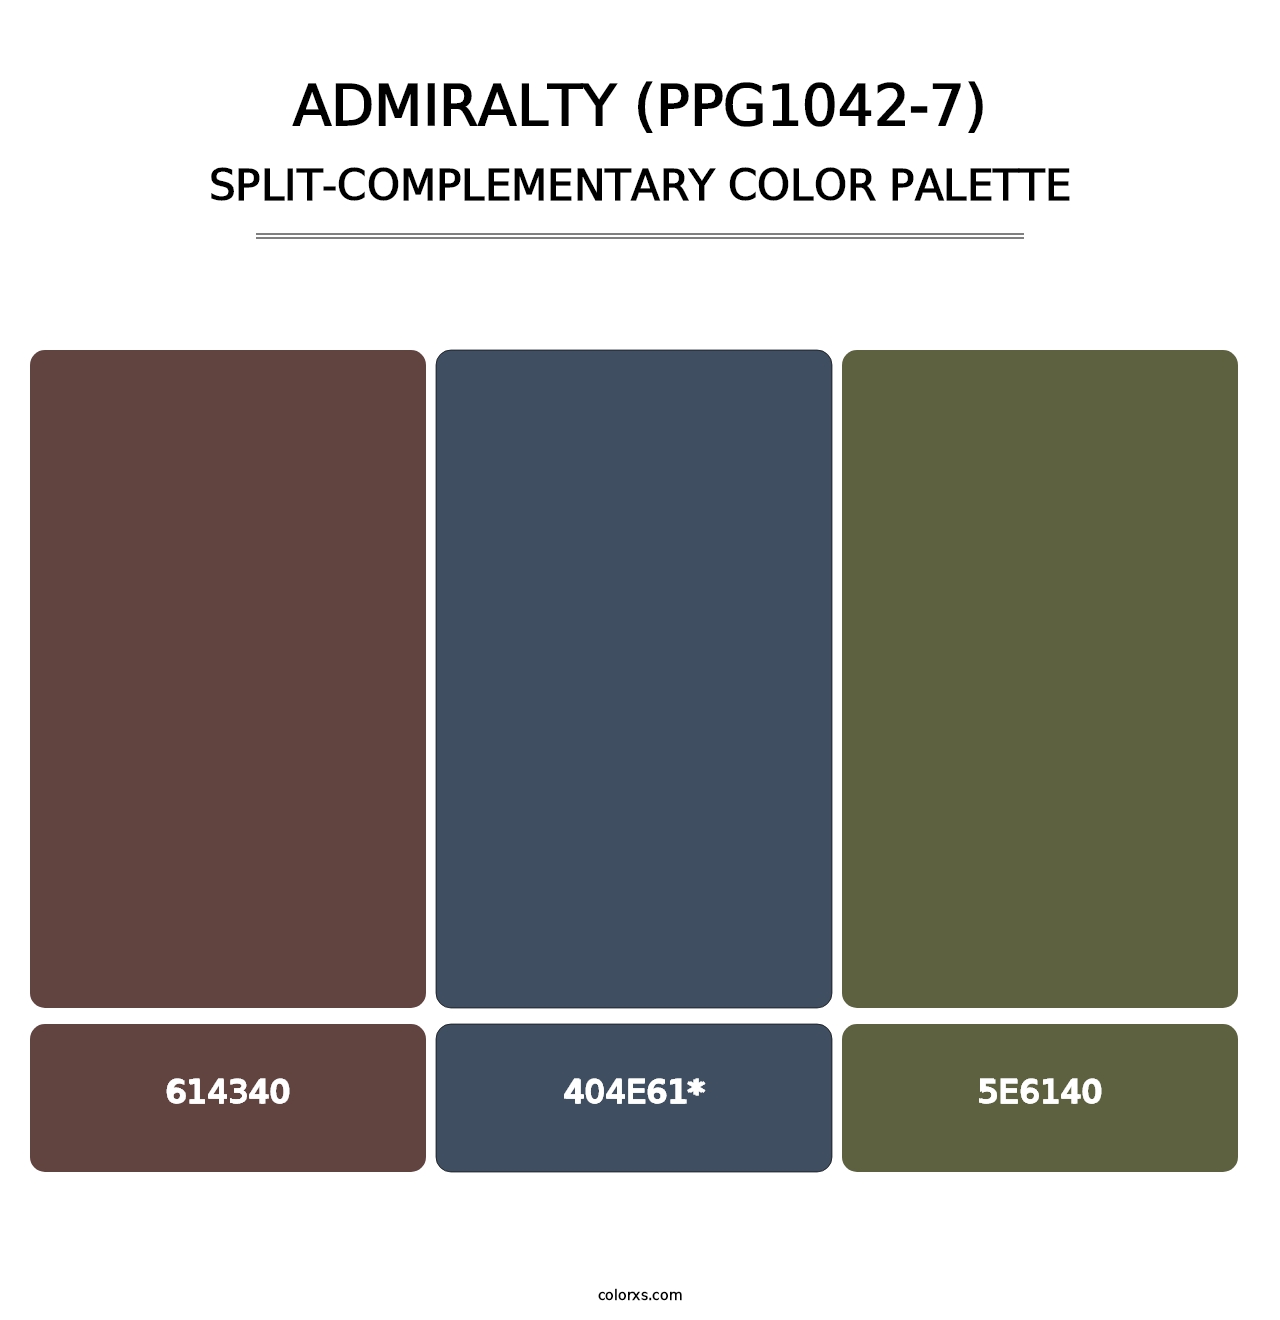 Admiralty (PPG1042-7) - Split-Complementary Color Palette